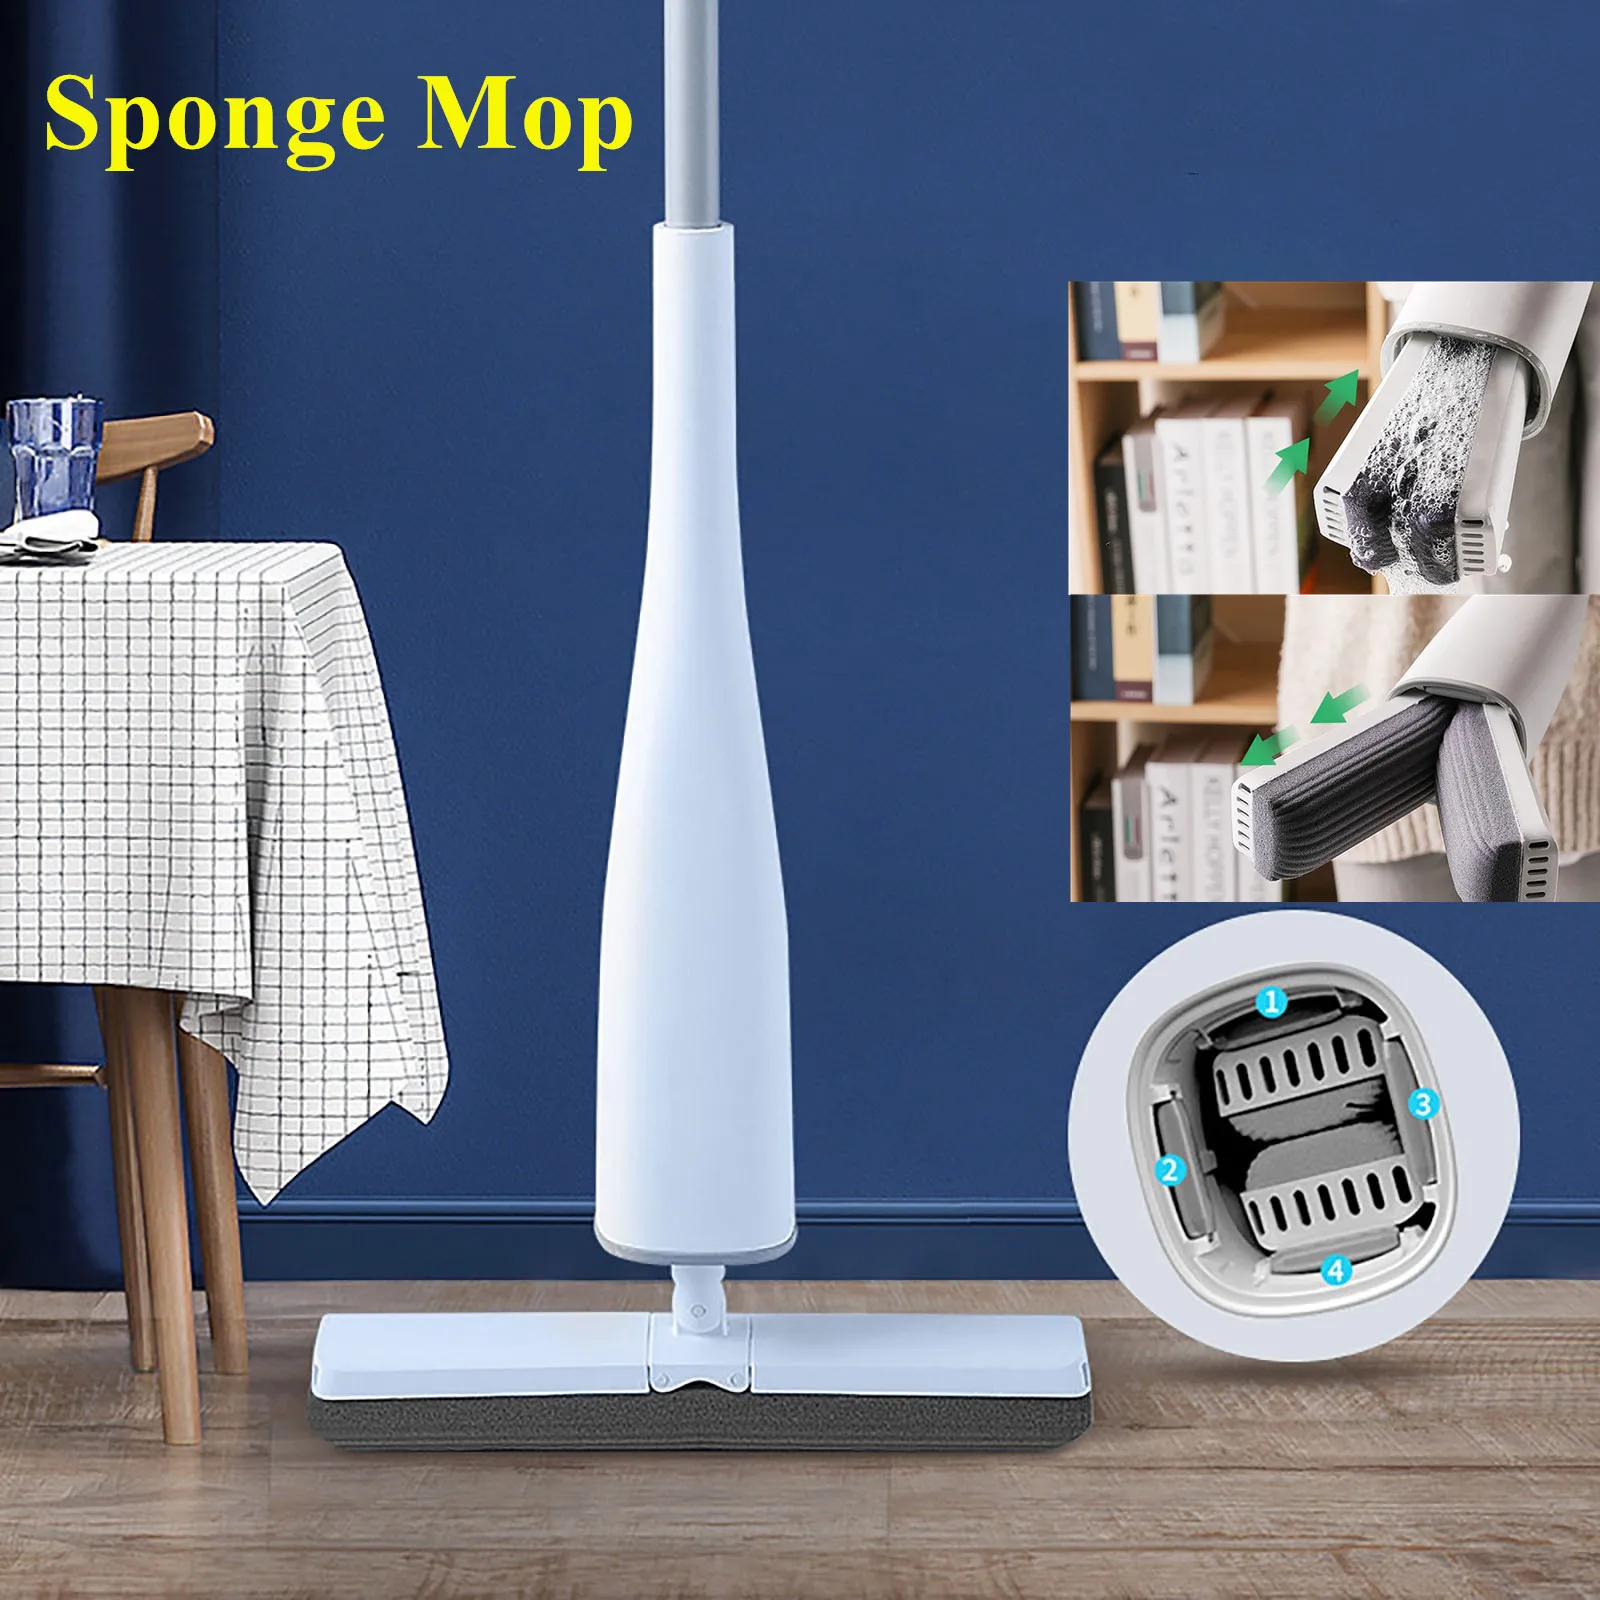 Splicing Sponge Mop with Cleaning Liquid Mop Floor Washing Mop Household Water-absorbing Glue Cotton Head Strong Decontamination